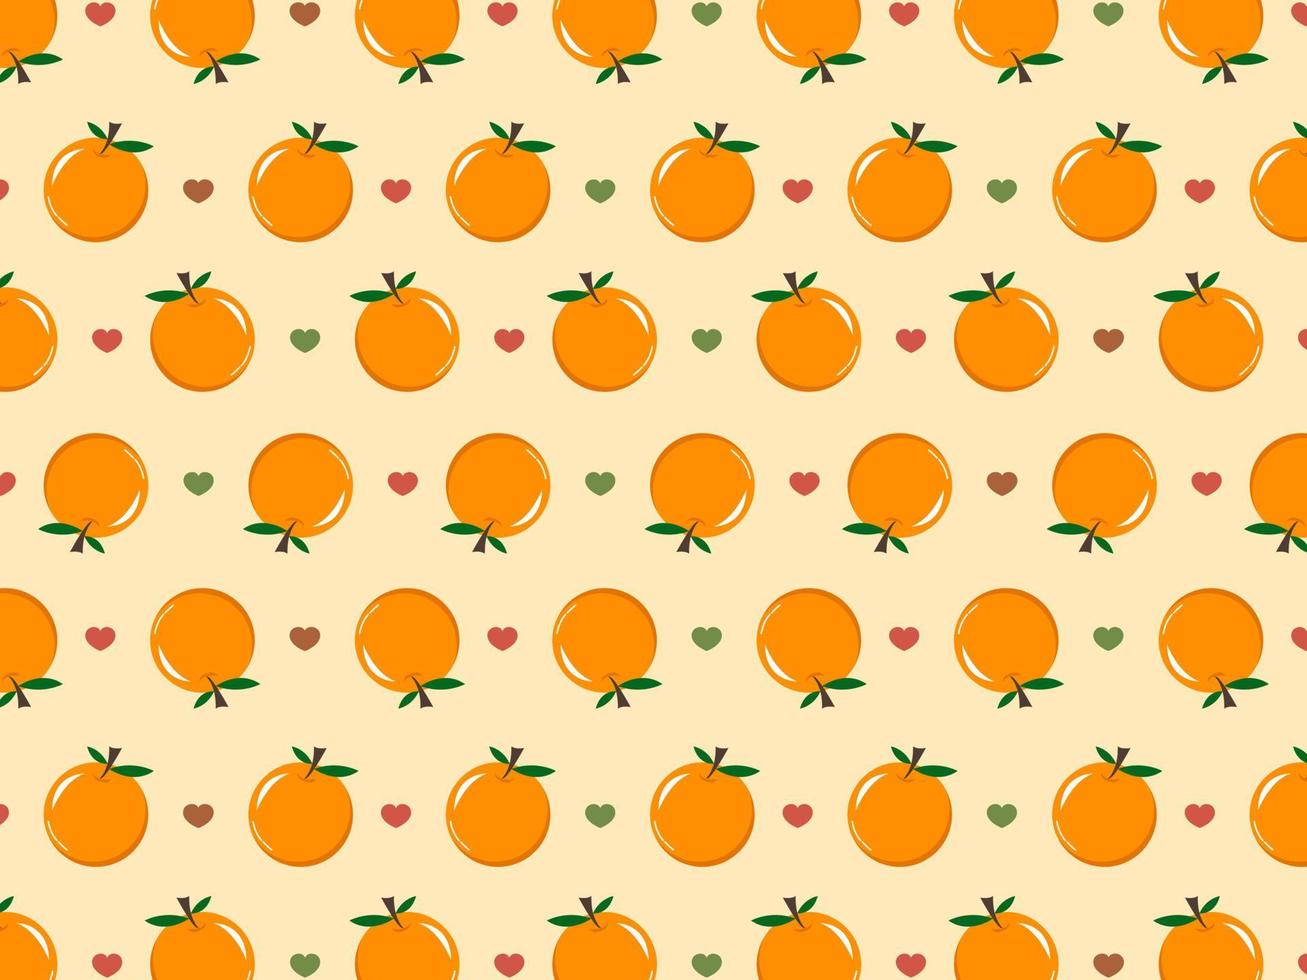 Seamless pattern with fruit oranges, orange fruit background with heart. Can be used for packaging, wrapping paper, greeting cards, stickers, fabrics and prints. vector